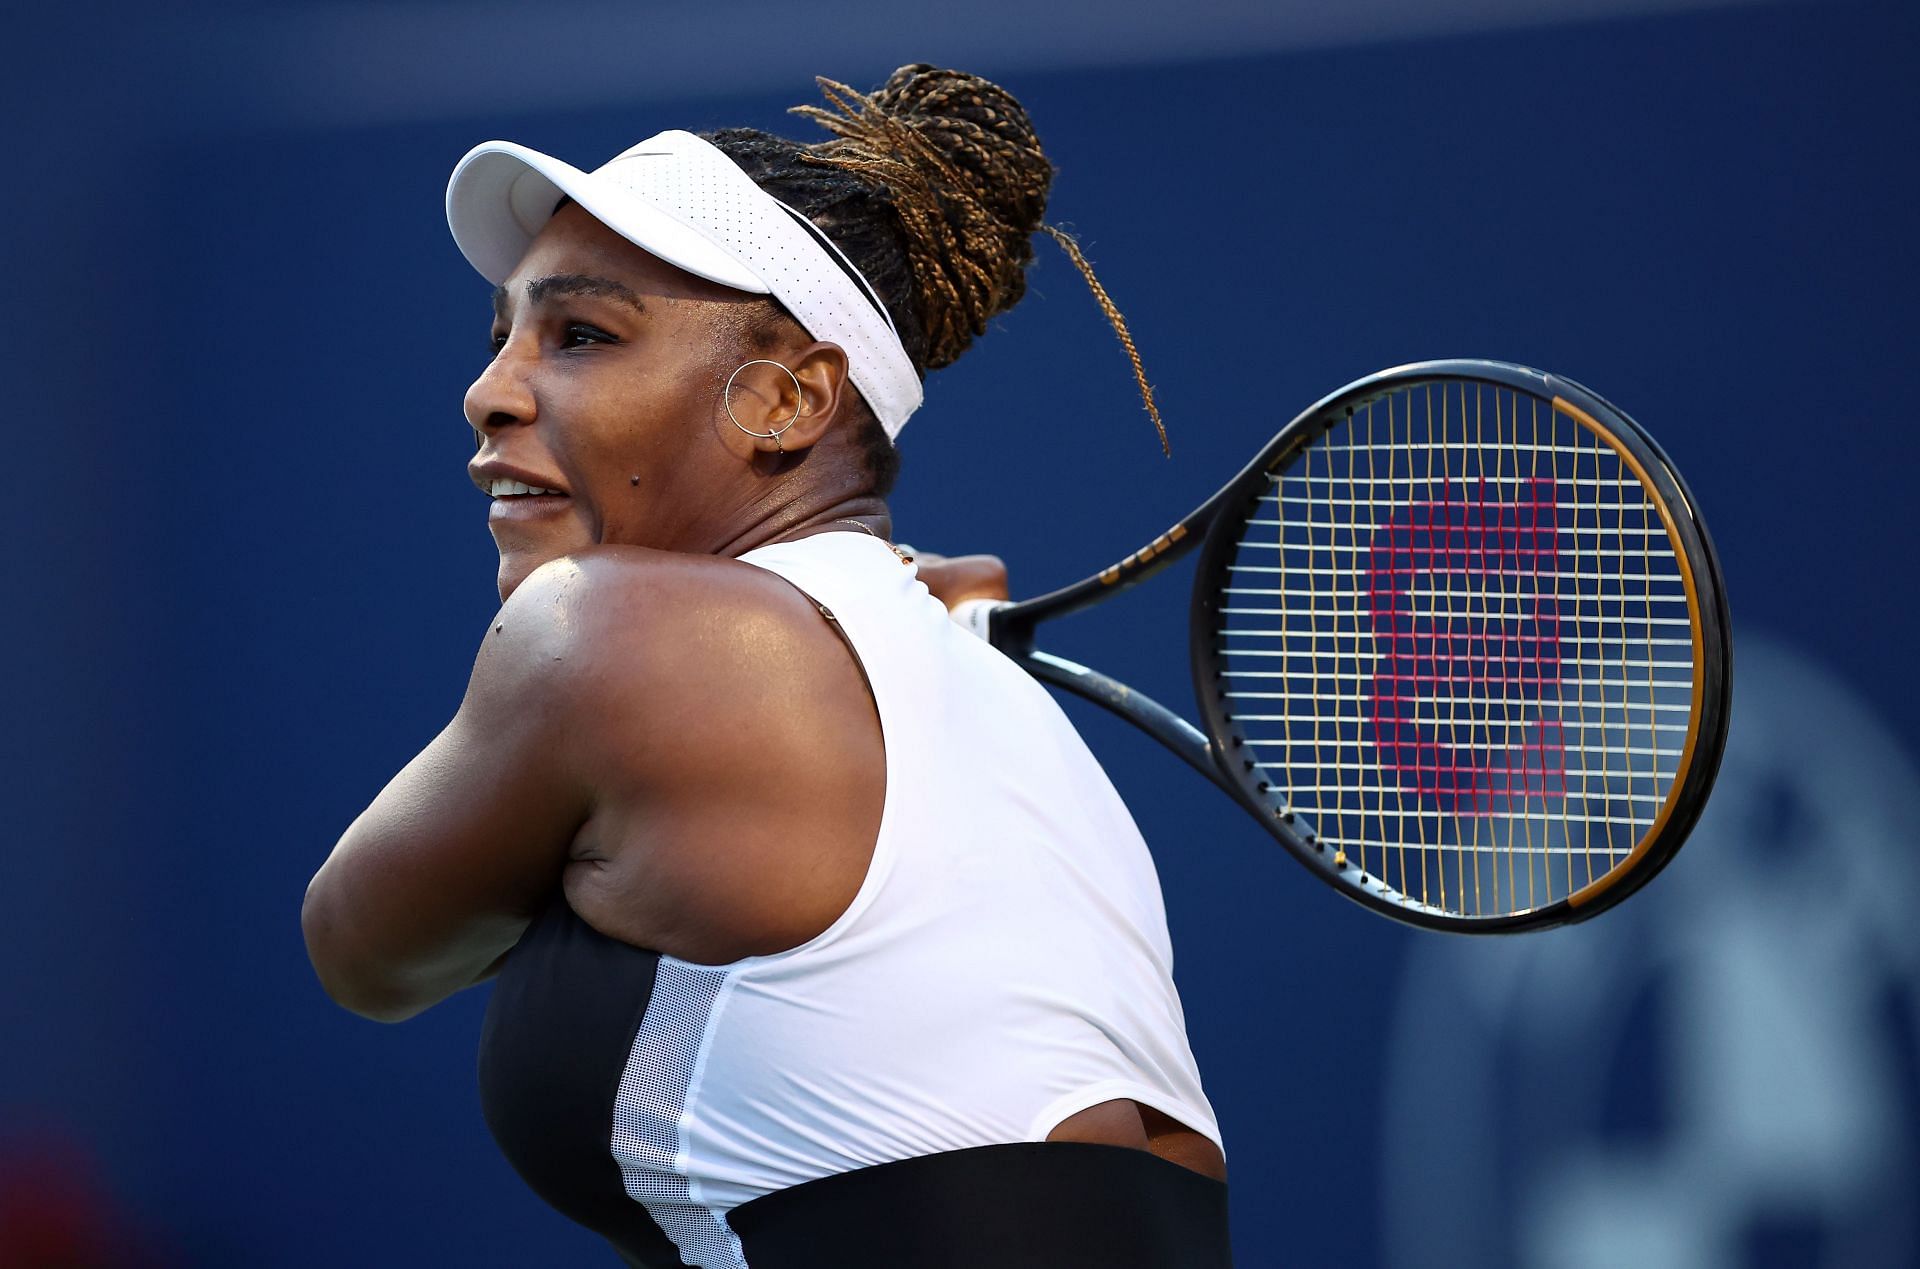 Williams will face Emma Raducanu in the first round of the Western &amp; Southern Open